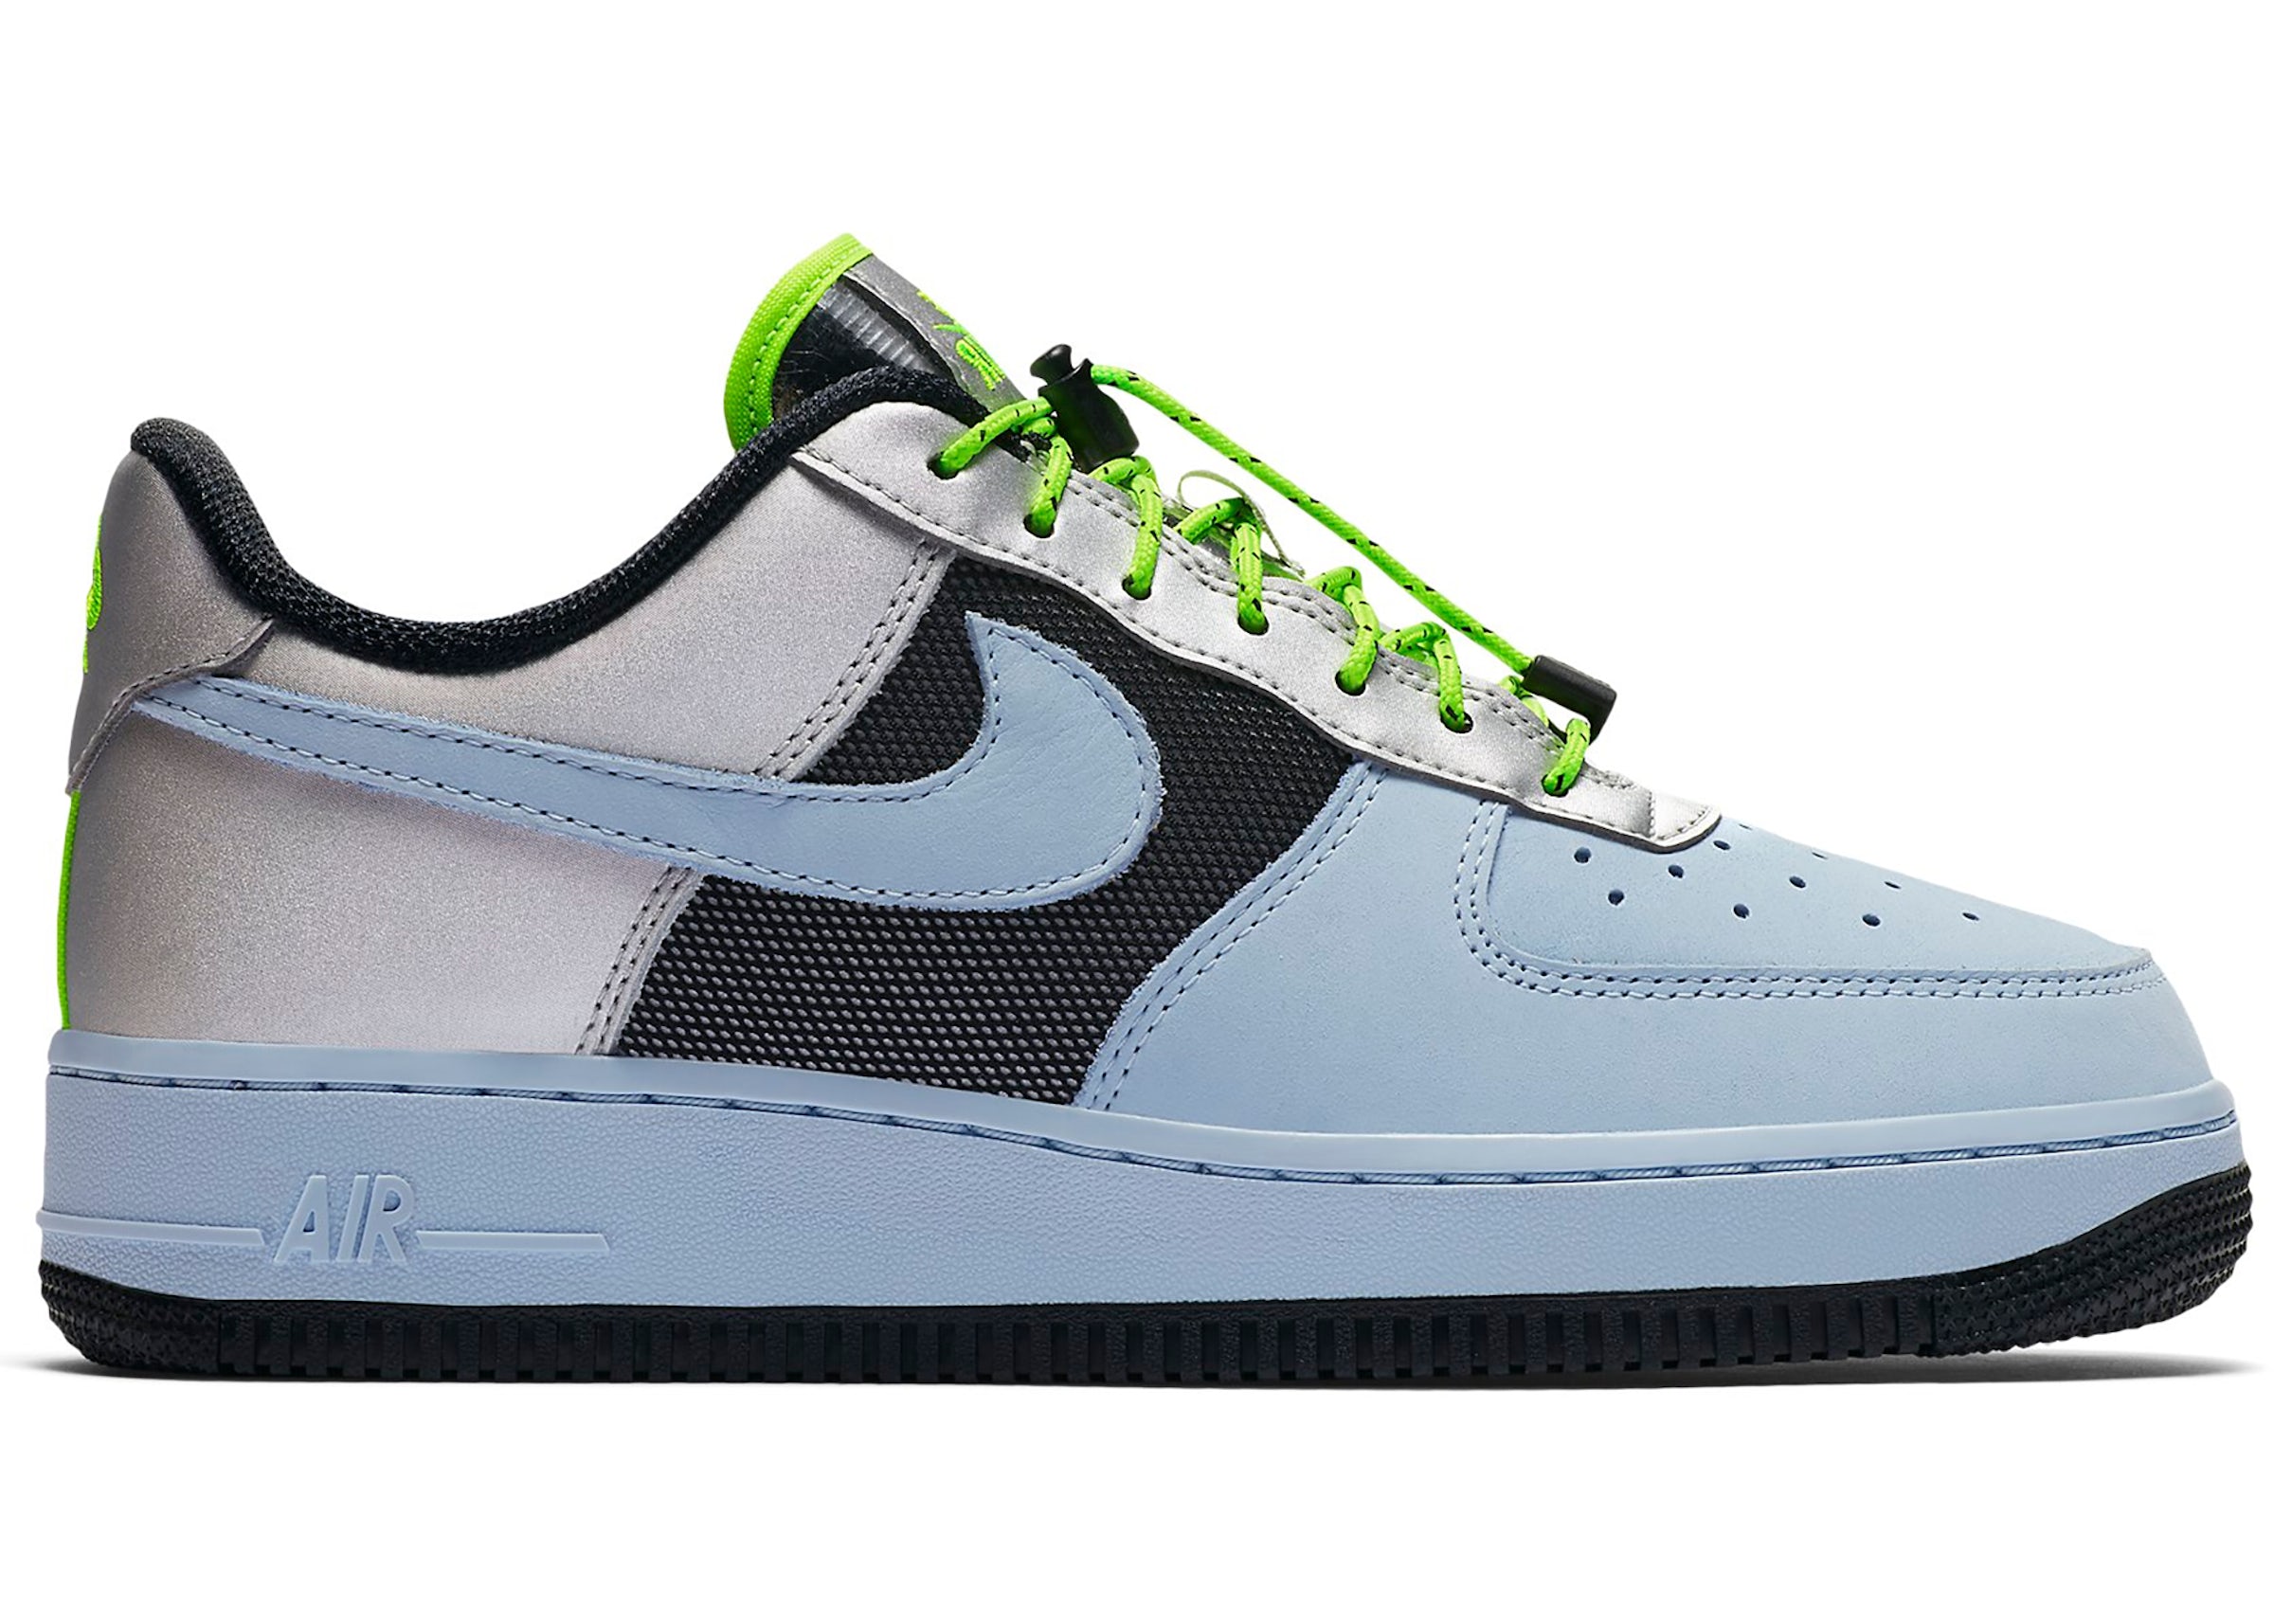 Nike Air Force 1 Low Toggle Celestine Blue (Women's) - CN0176-400